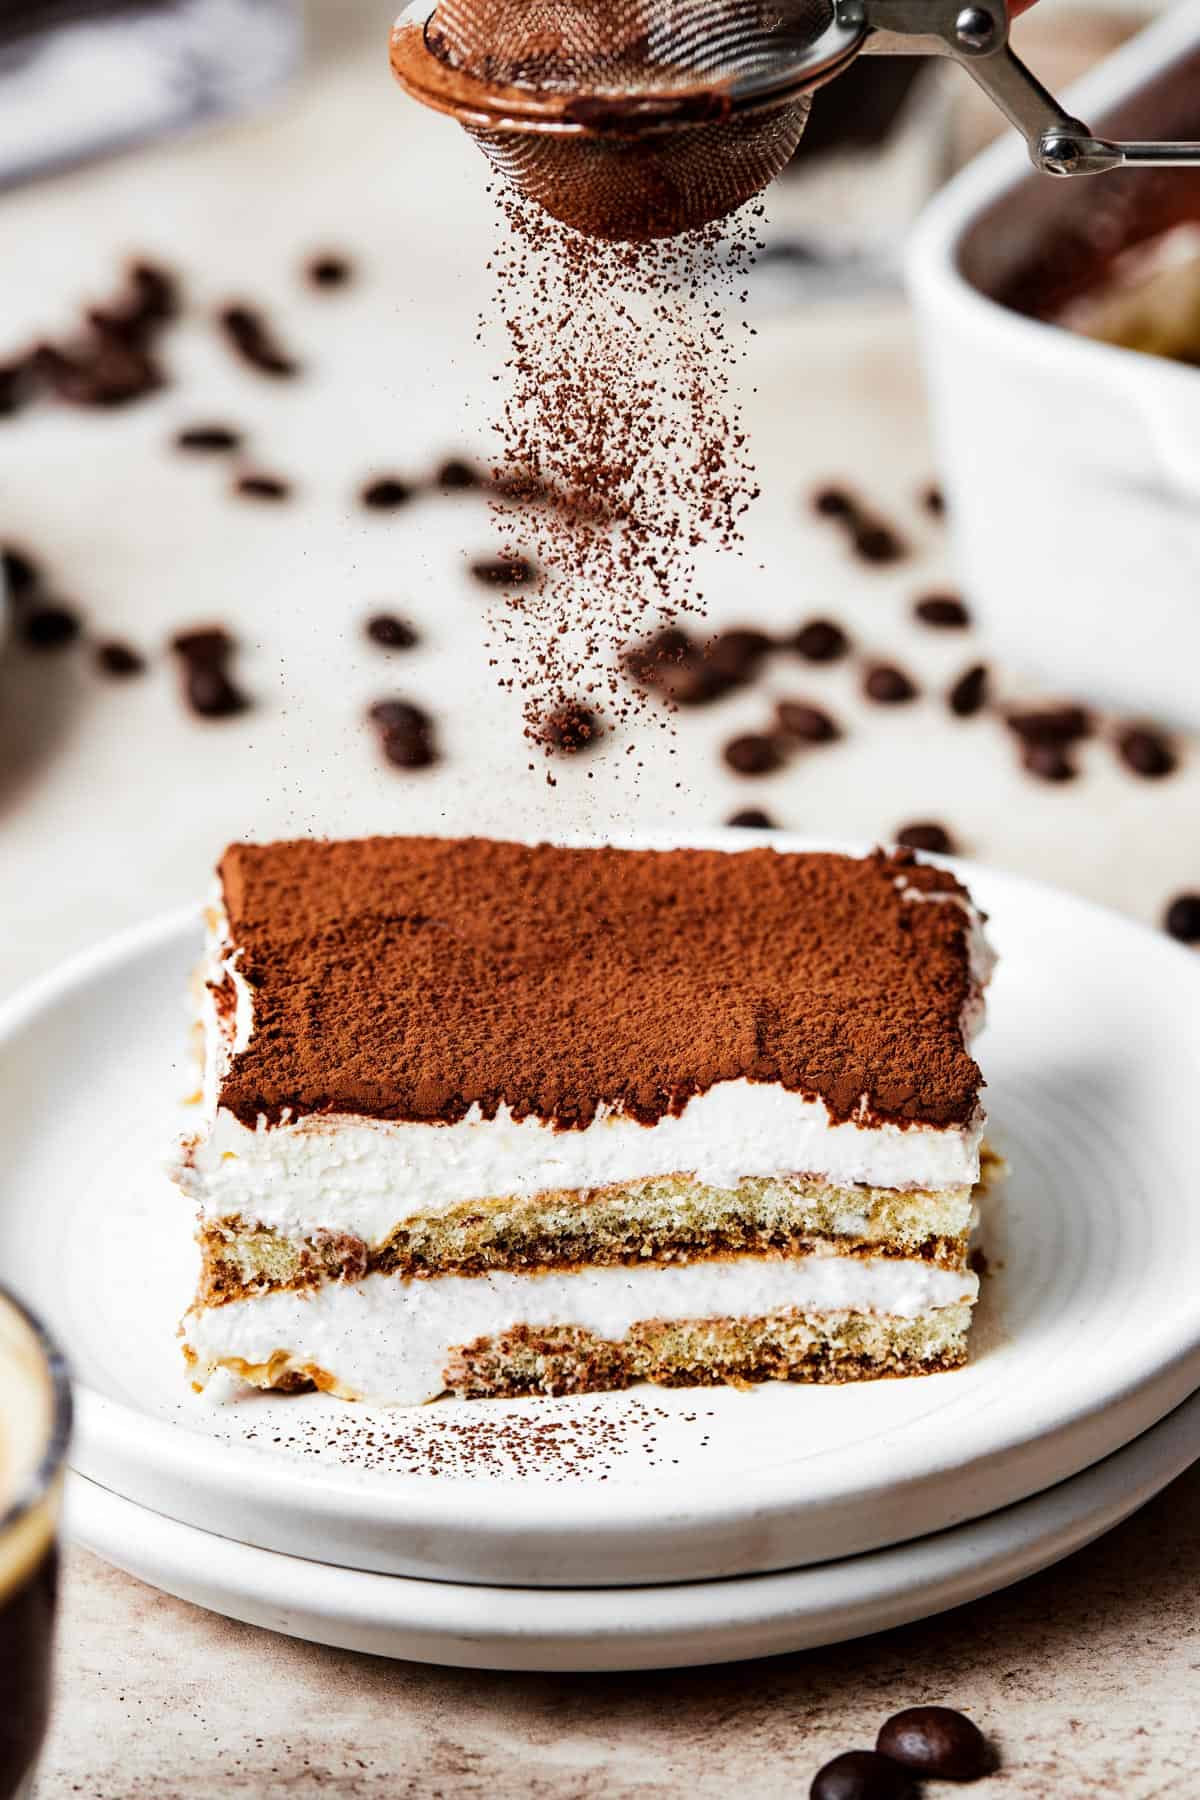 A square of tiramisu on a dessert plate, with the layers visible from the side.